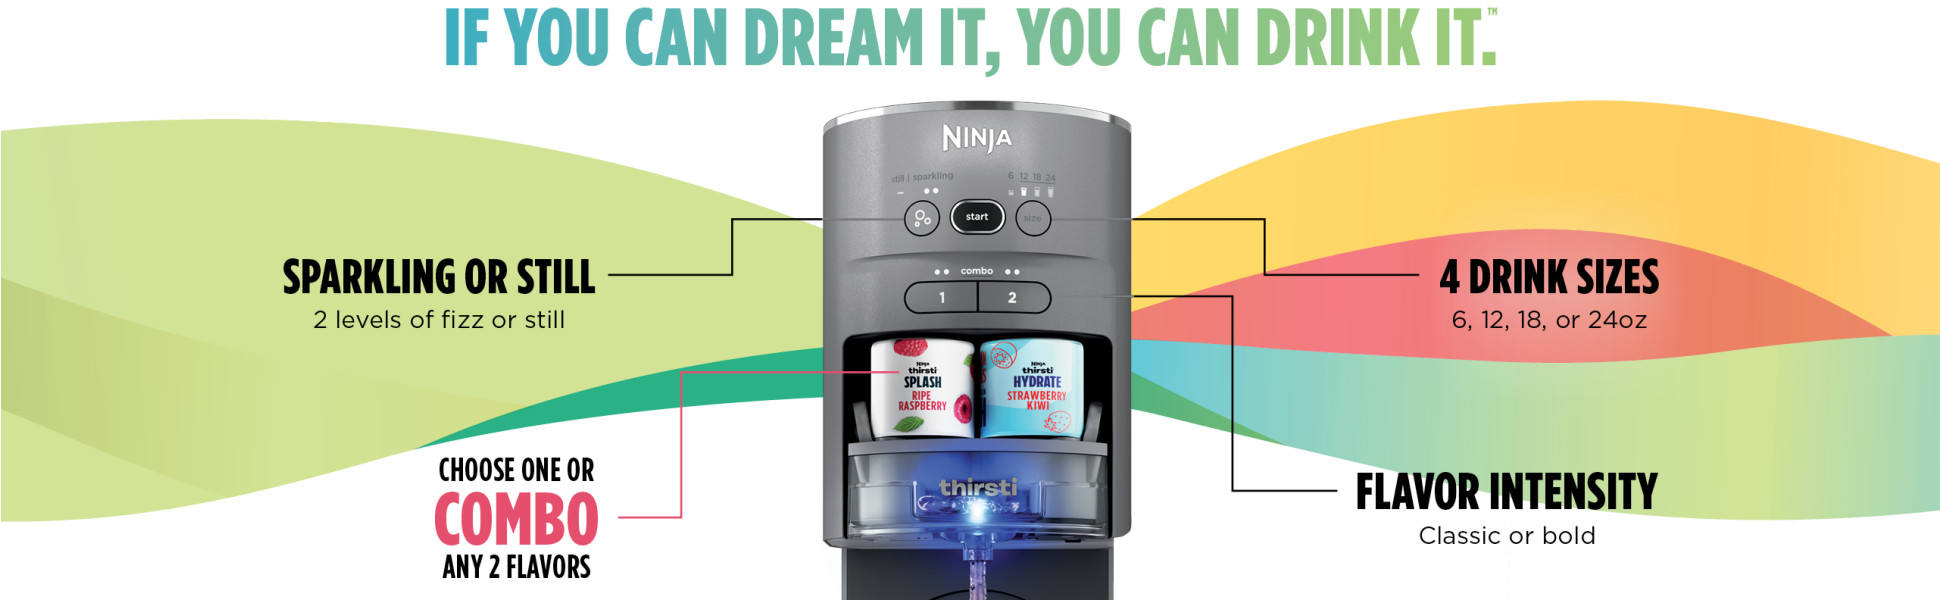 I Tried Ninja's New Thirsti Drink System: A Souped-Up Answer to